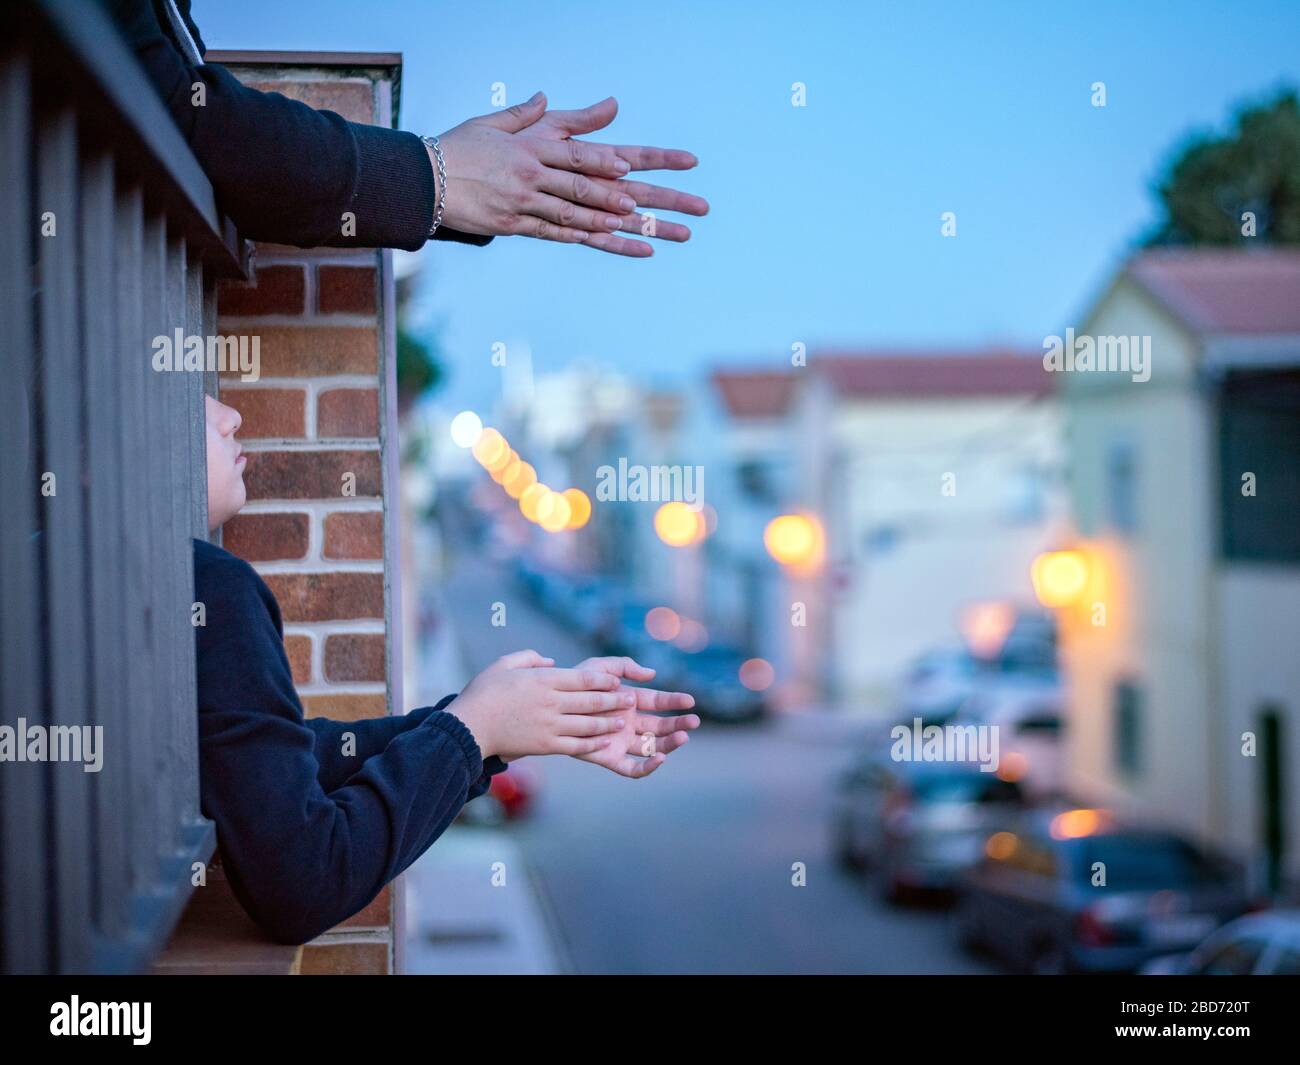 hands clapping on a balcony overlooking a street with the lights on Stock Photo